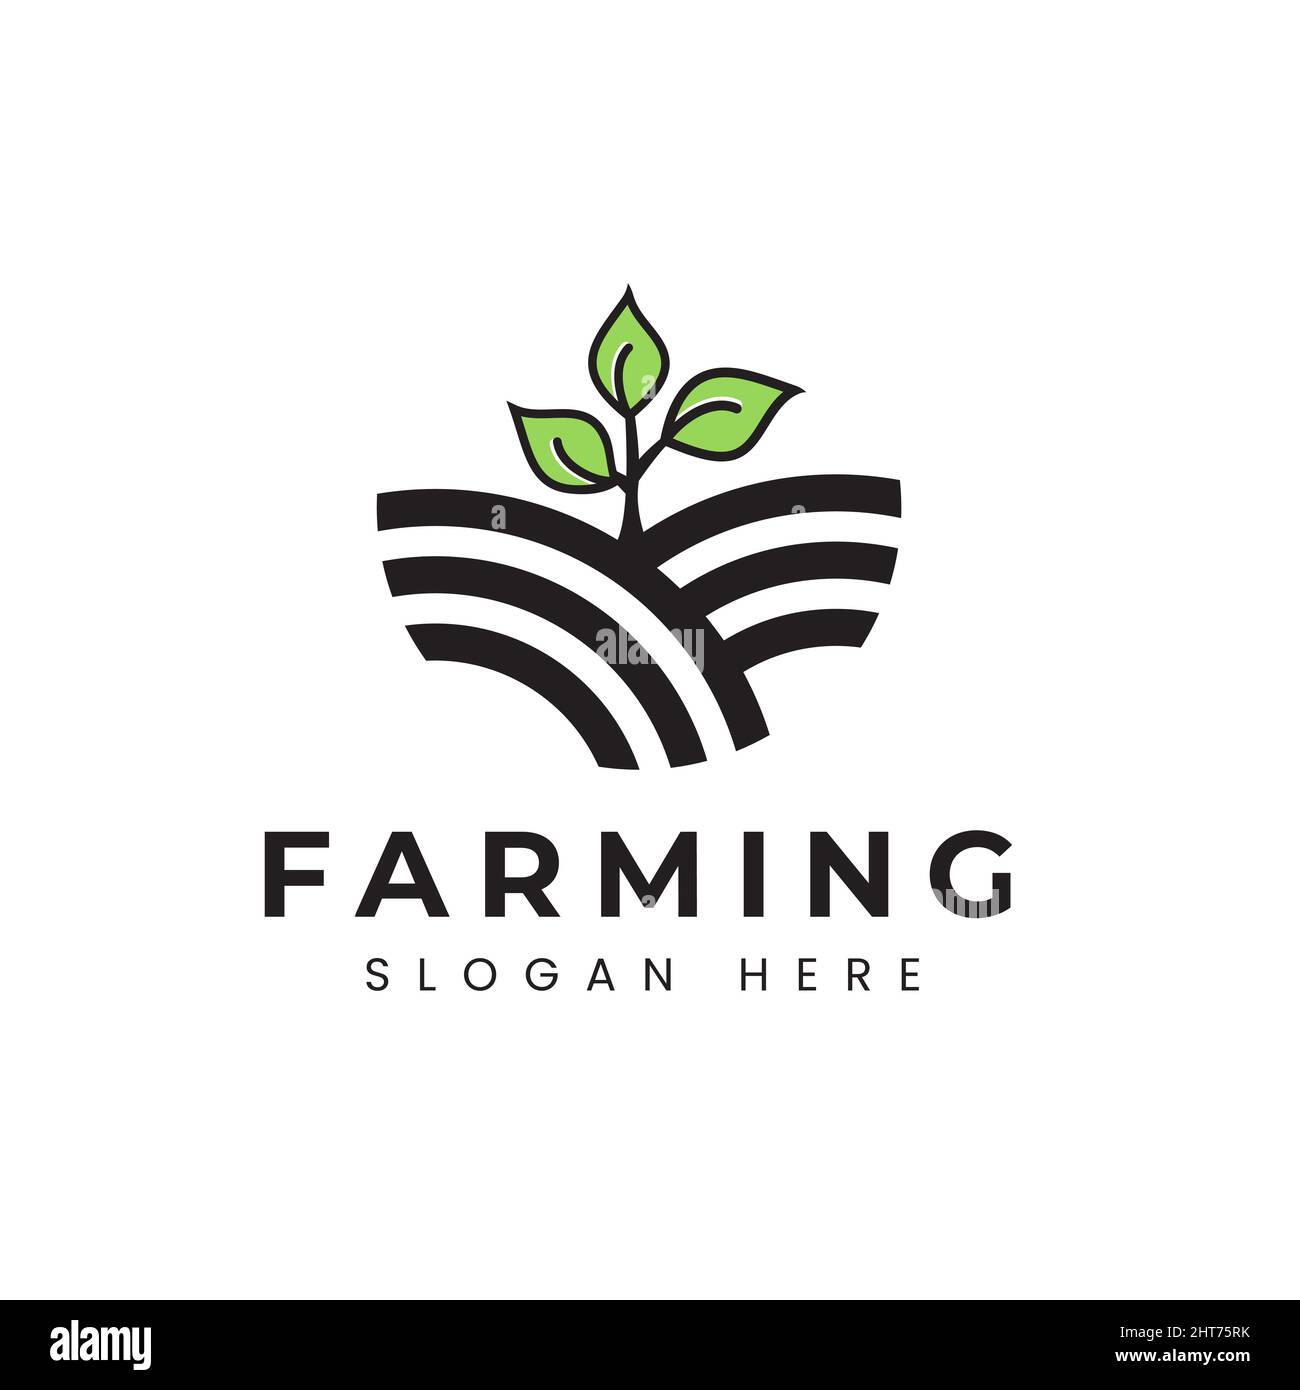 Agriculture logo Stock Vector Images - Alamy